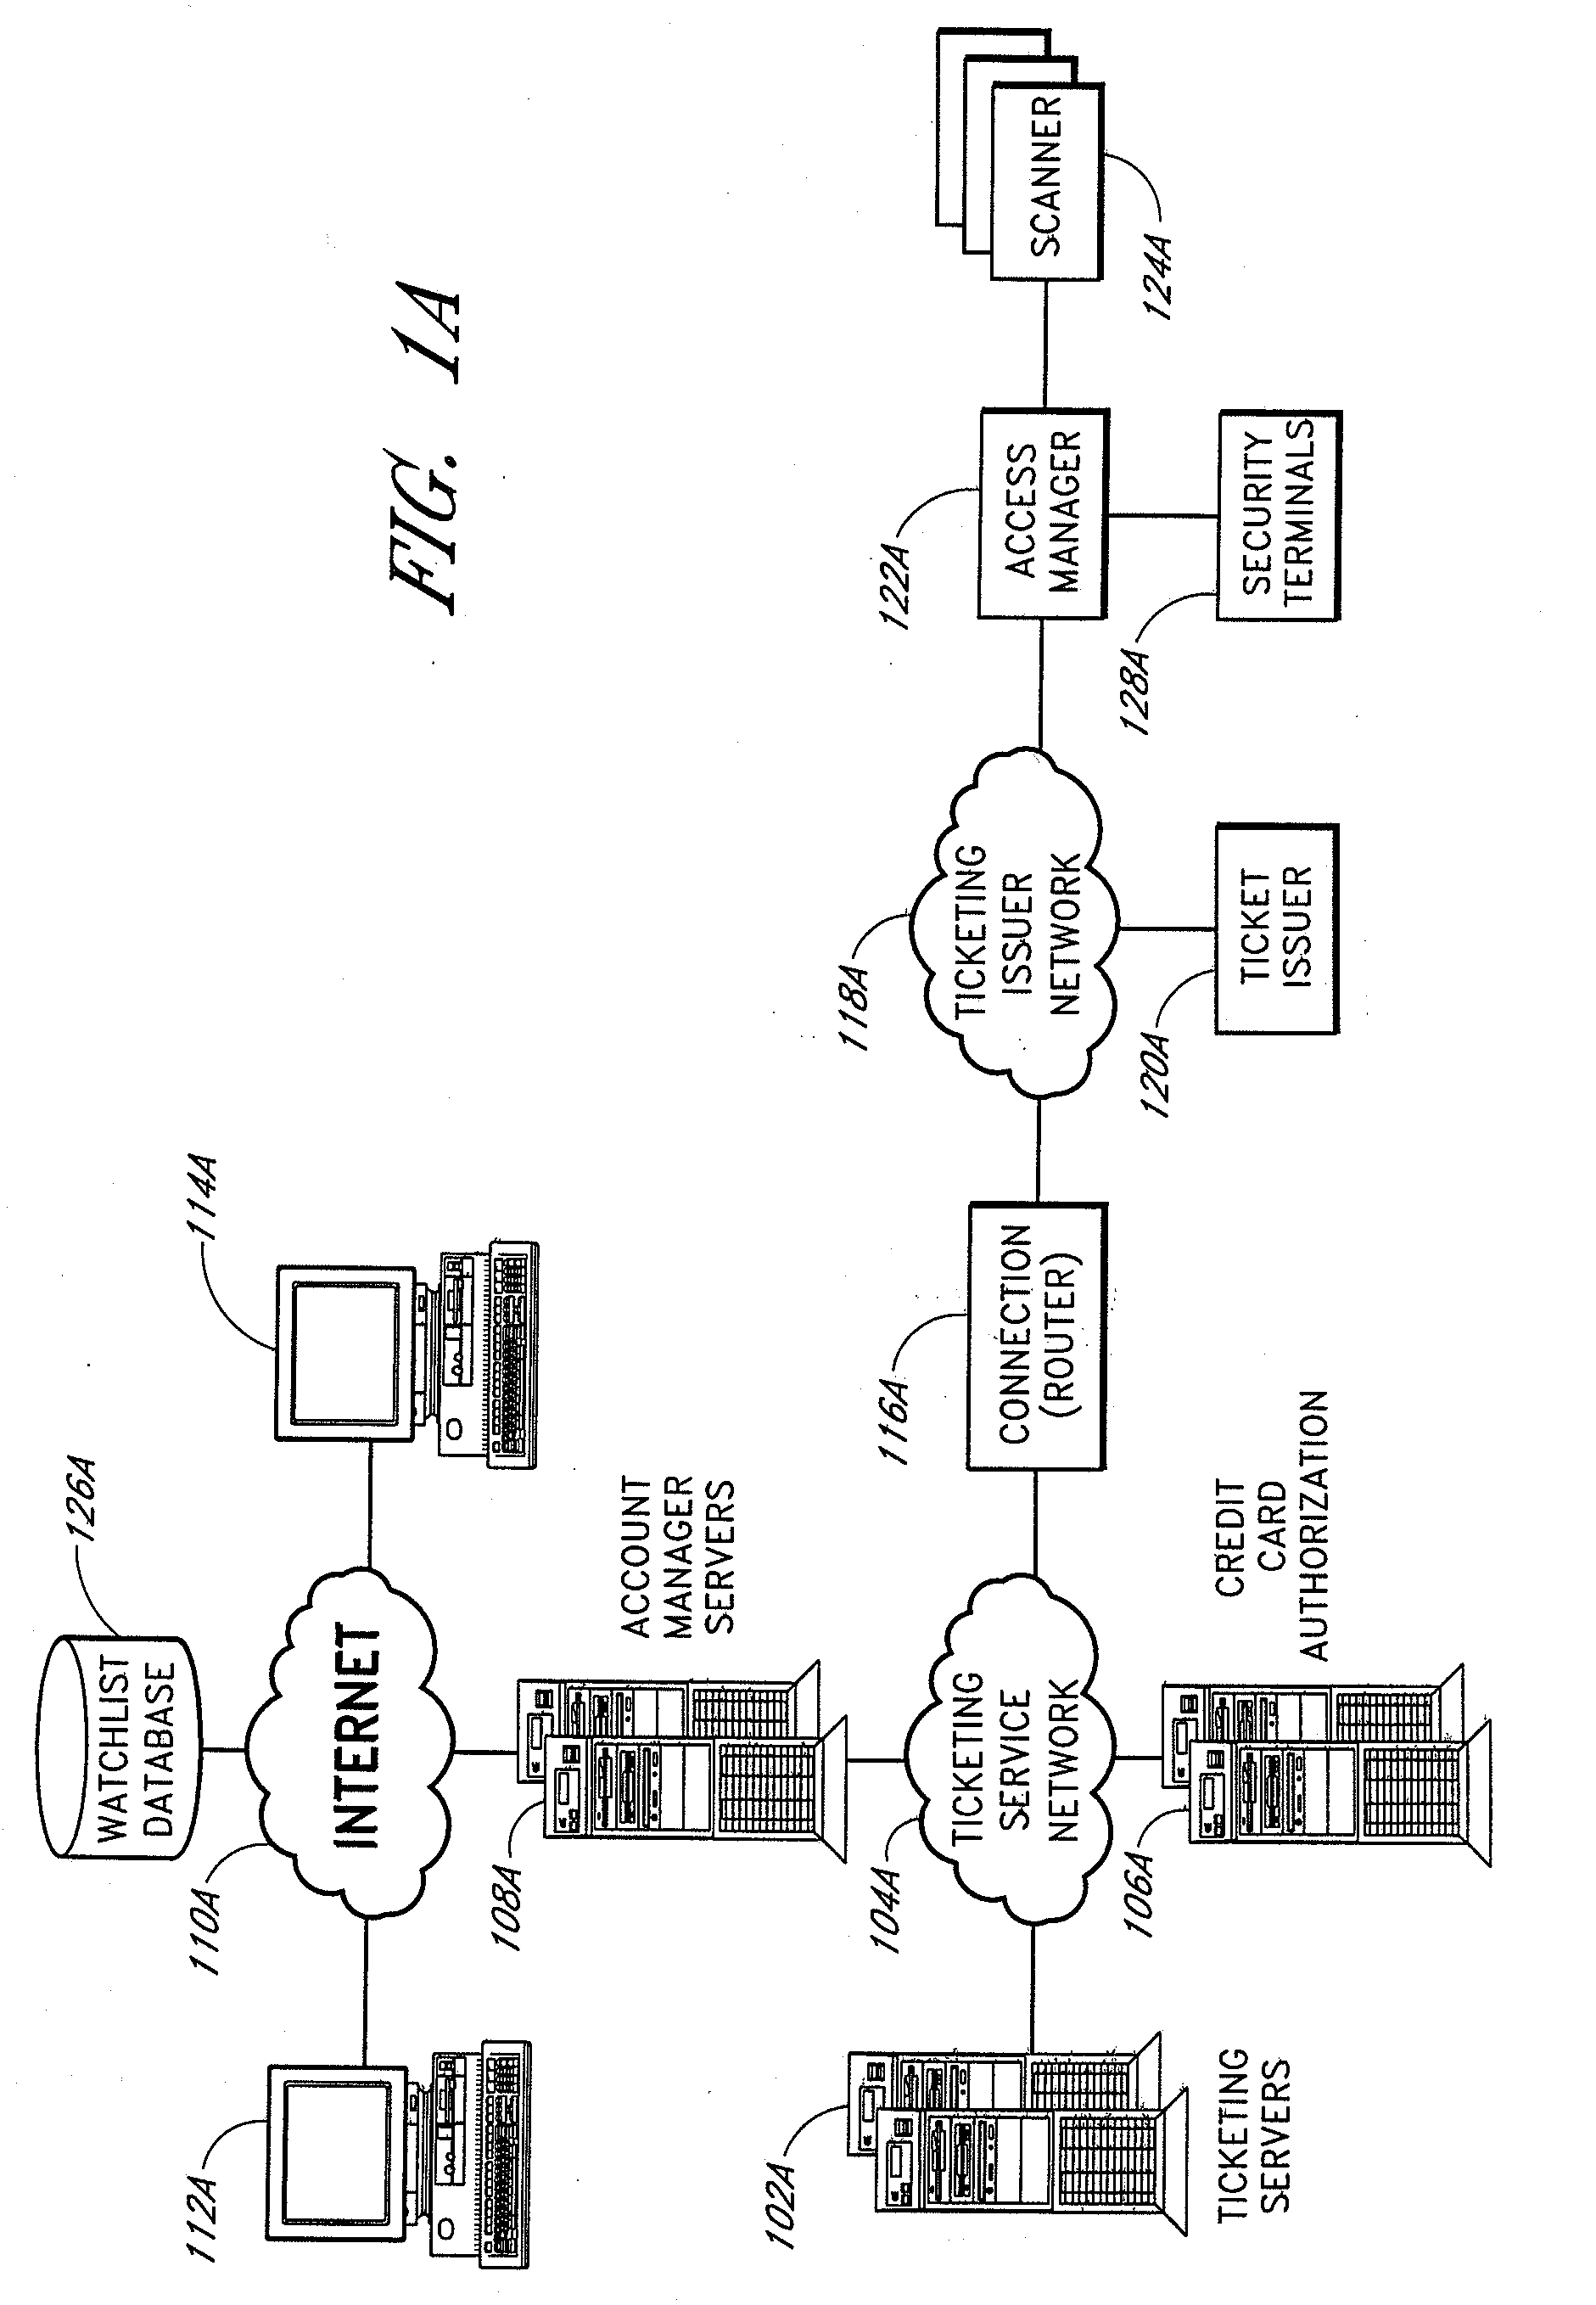 Apparatus for access control and processing